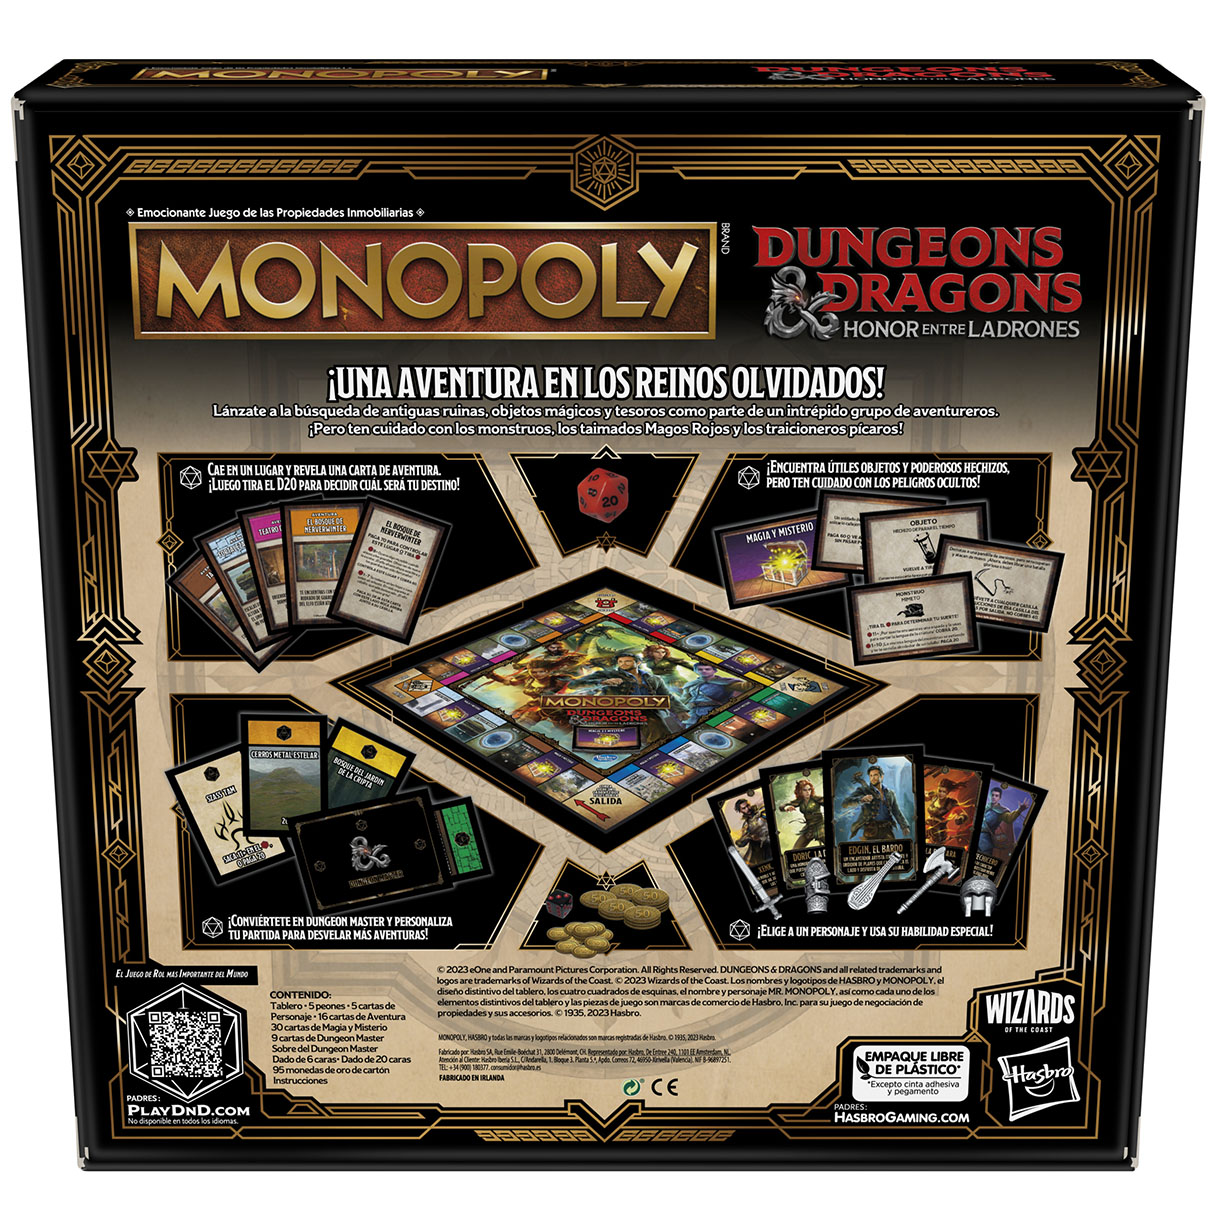 monopoly dungeons and dragons movie ( hasbro f6219105 )